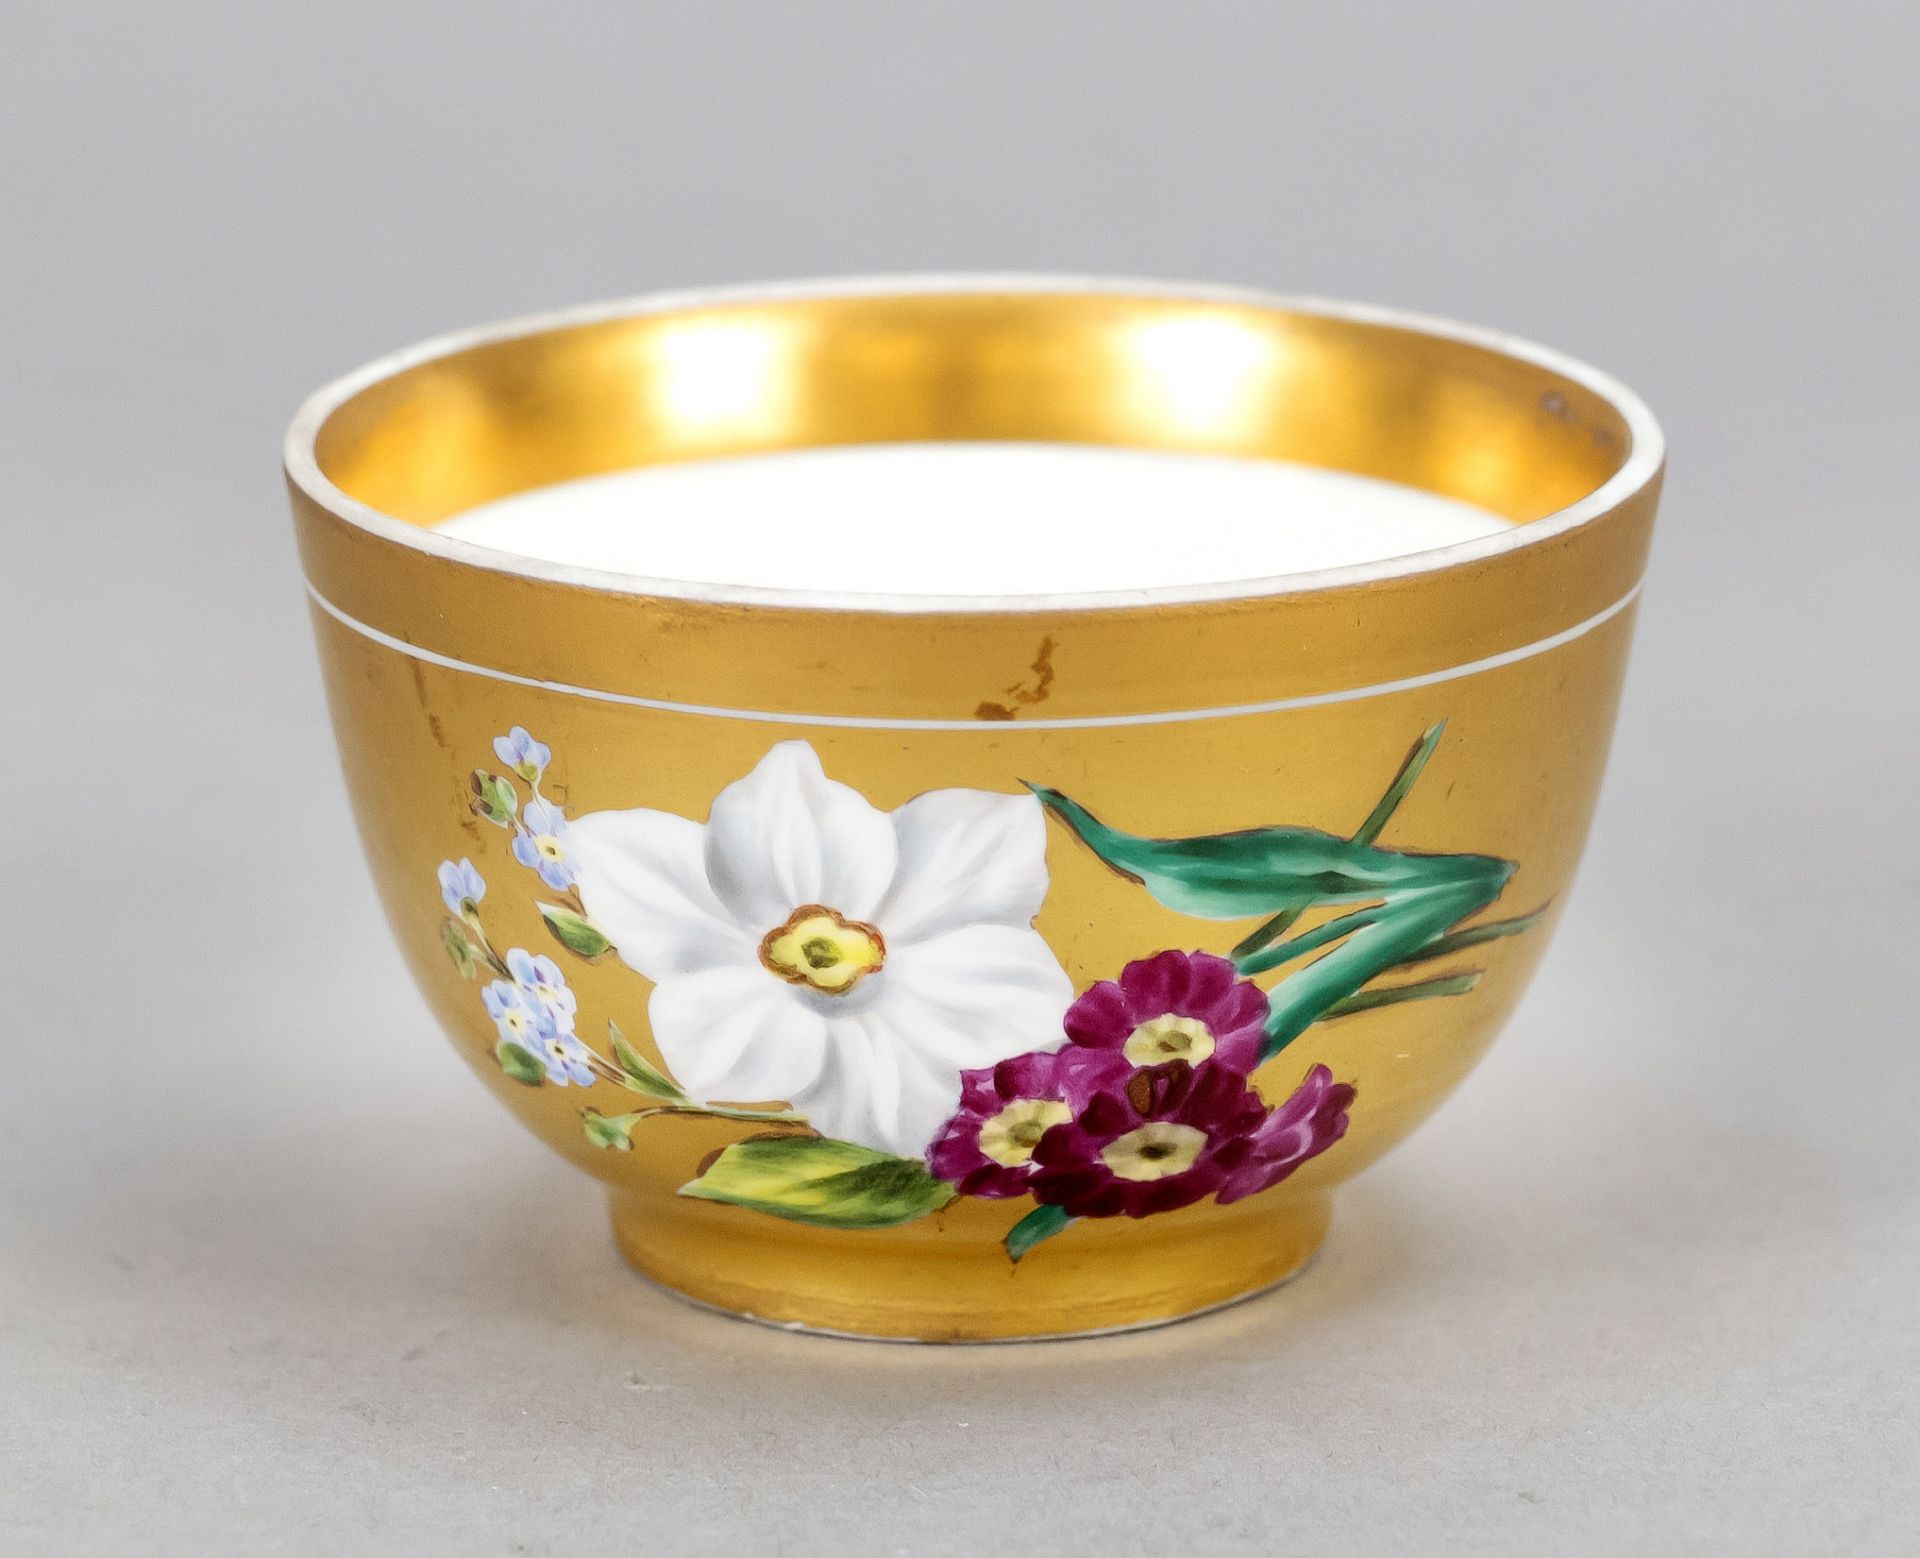 A small pot, Augarten, Vienna, 1806, polychrome floral painting on a gold rim, h. 4 cm